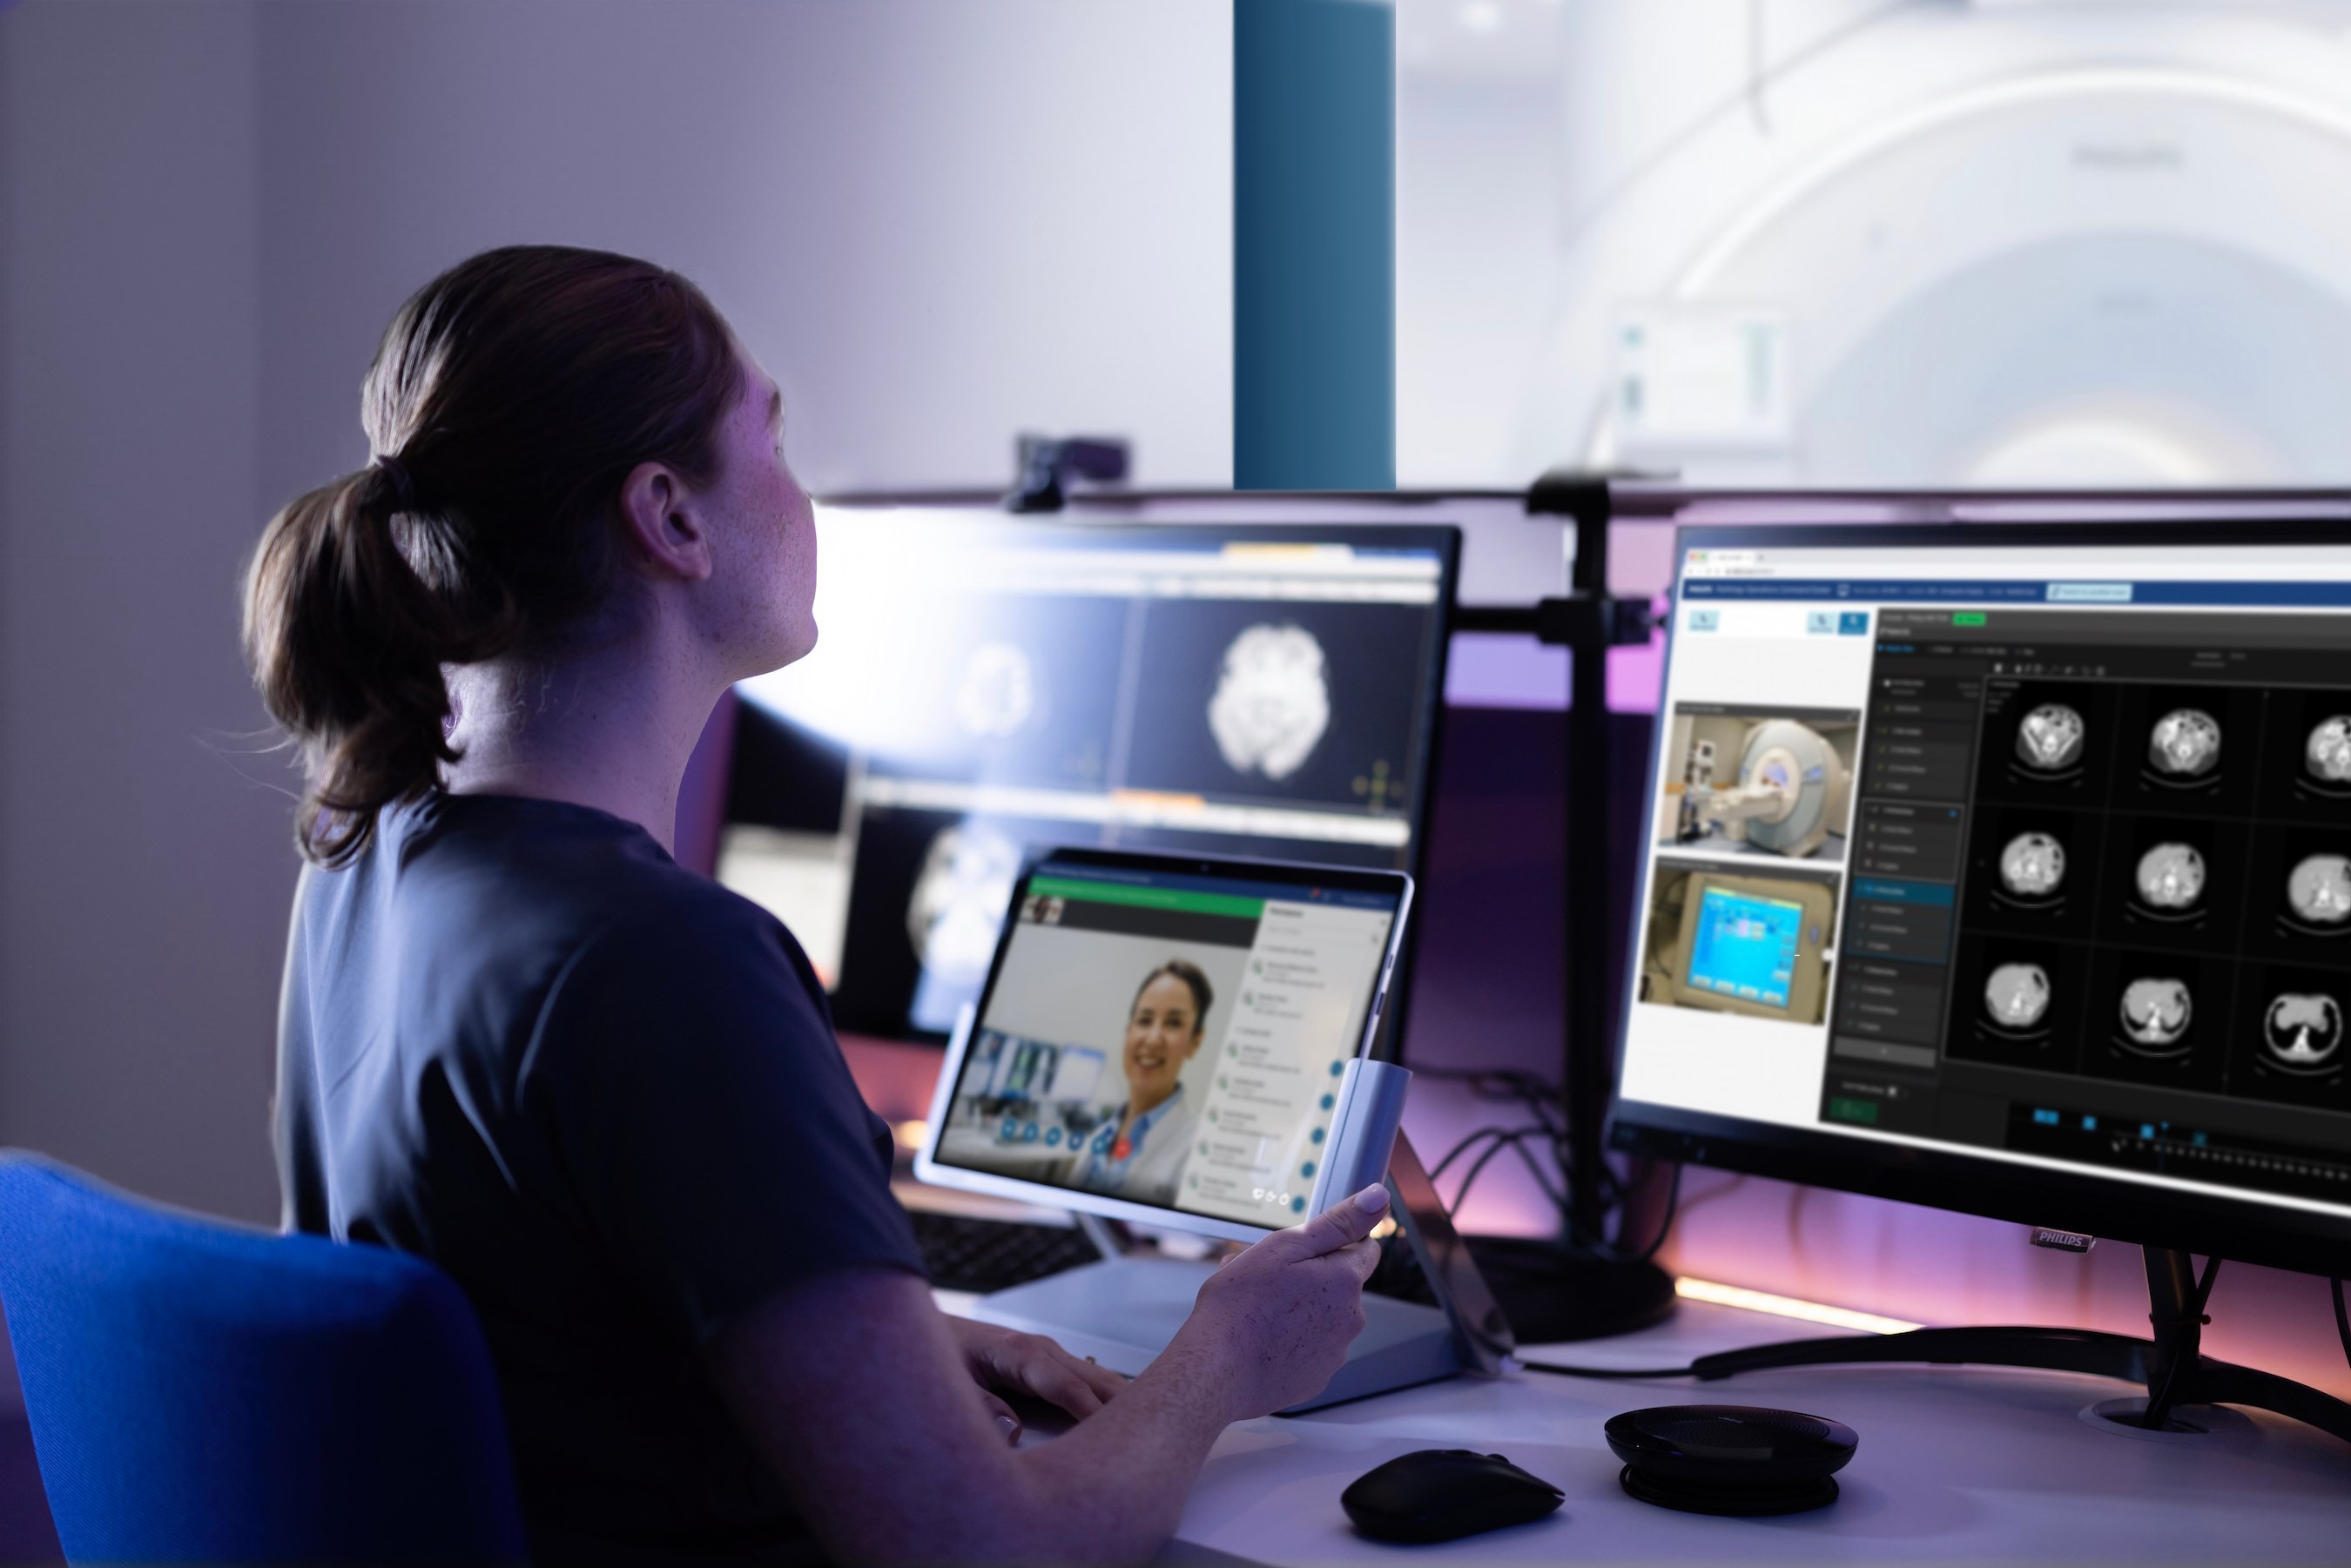 Now radiology departments, imaging technologists and medical experts have a solution they can use to help tackle these challenges.